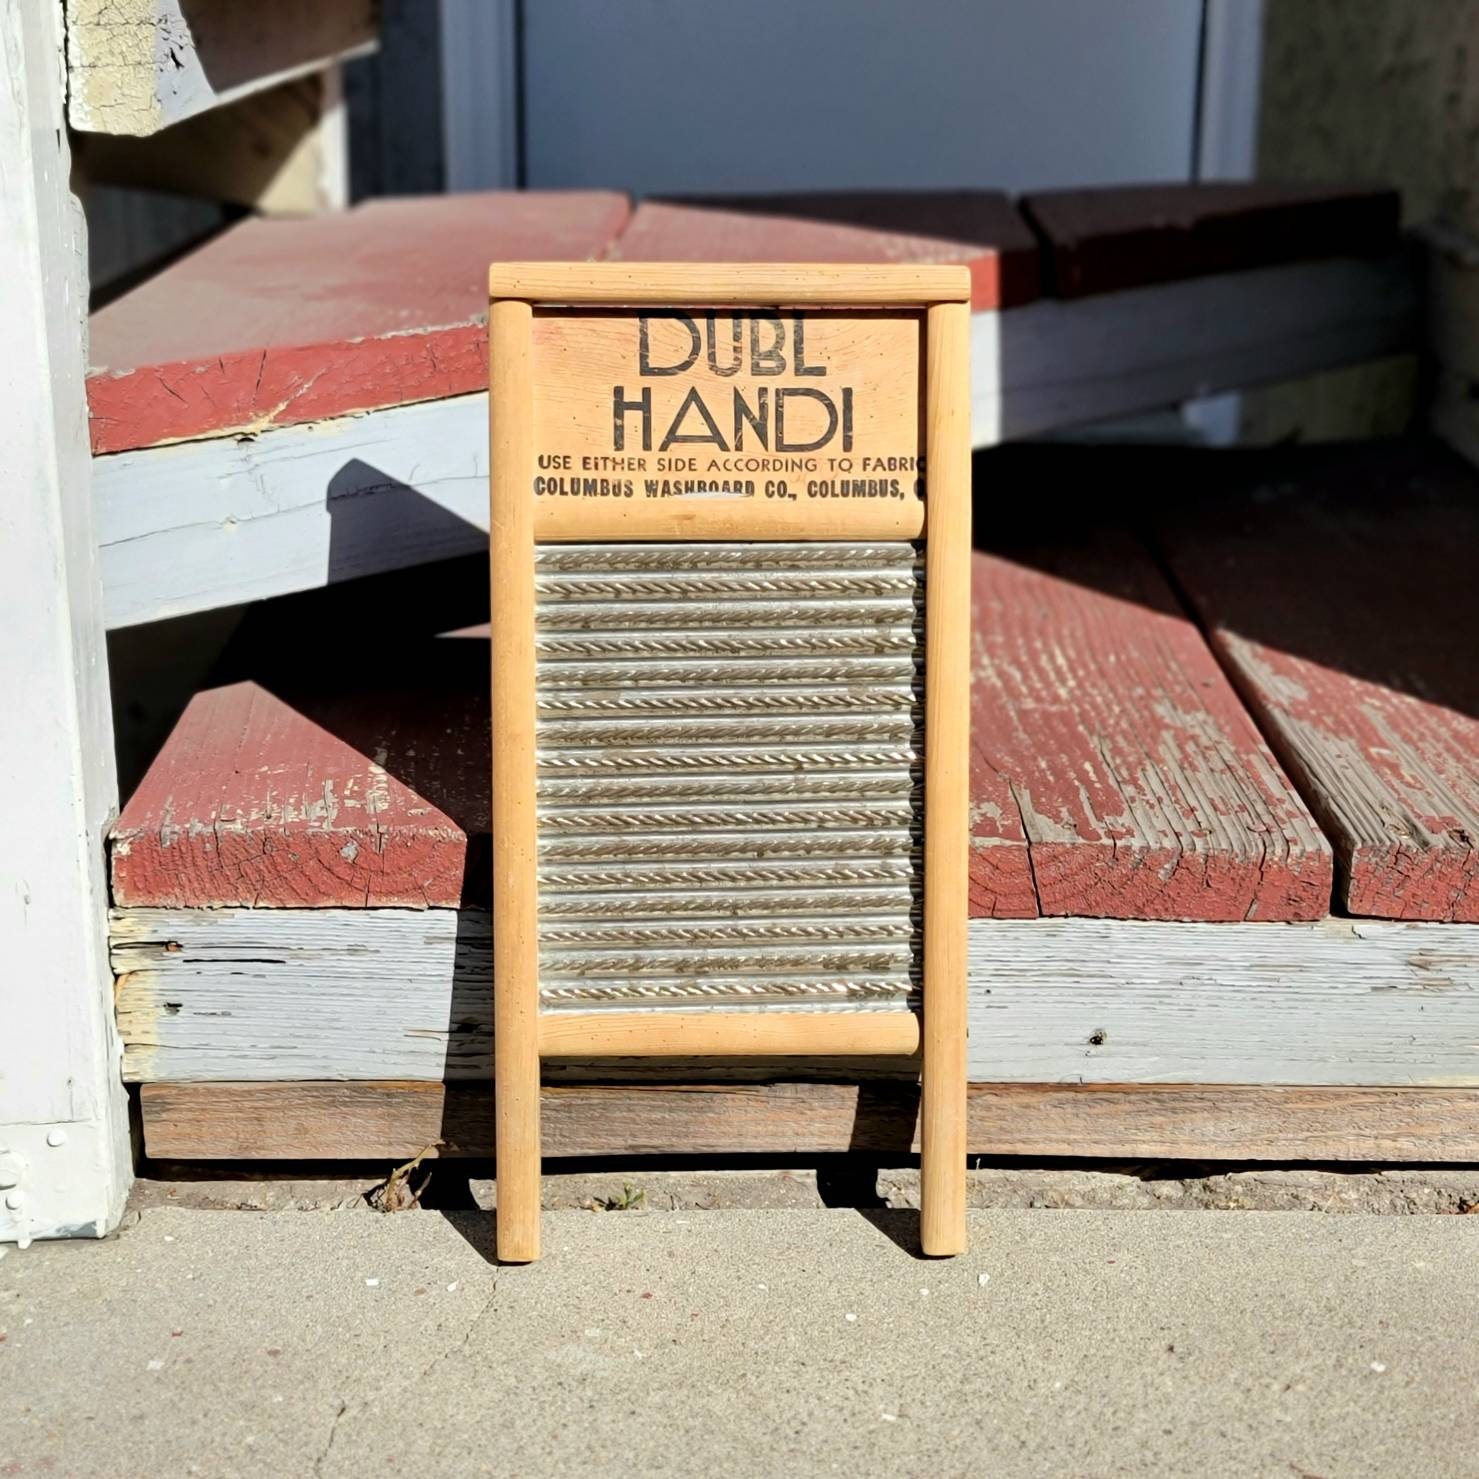 Columbus Washboard Company Produces Instruments Aimed To Meet